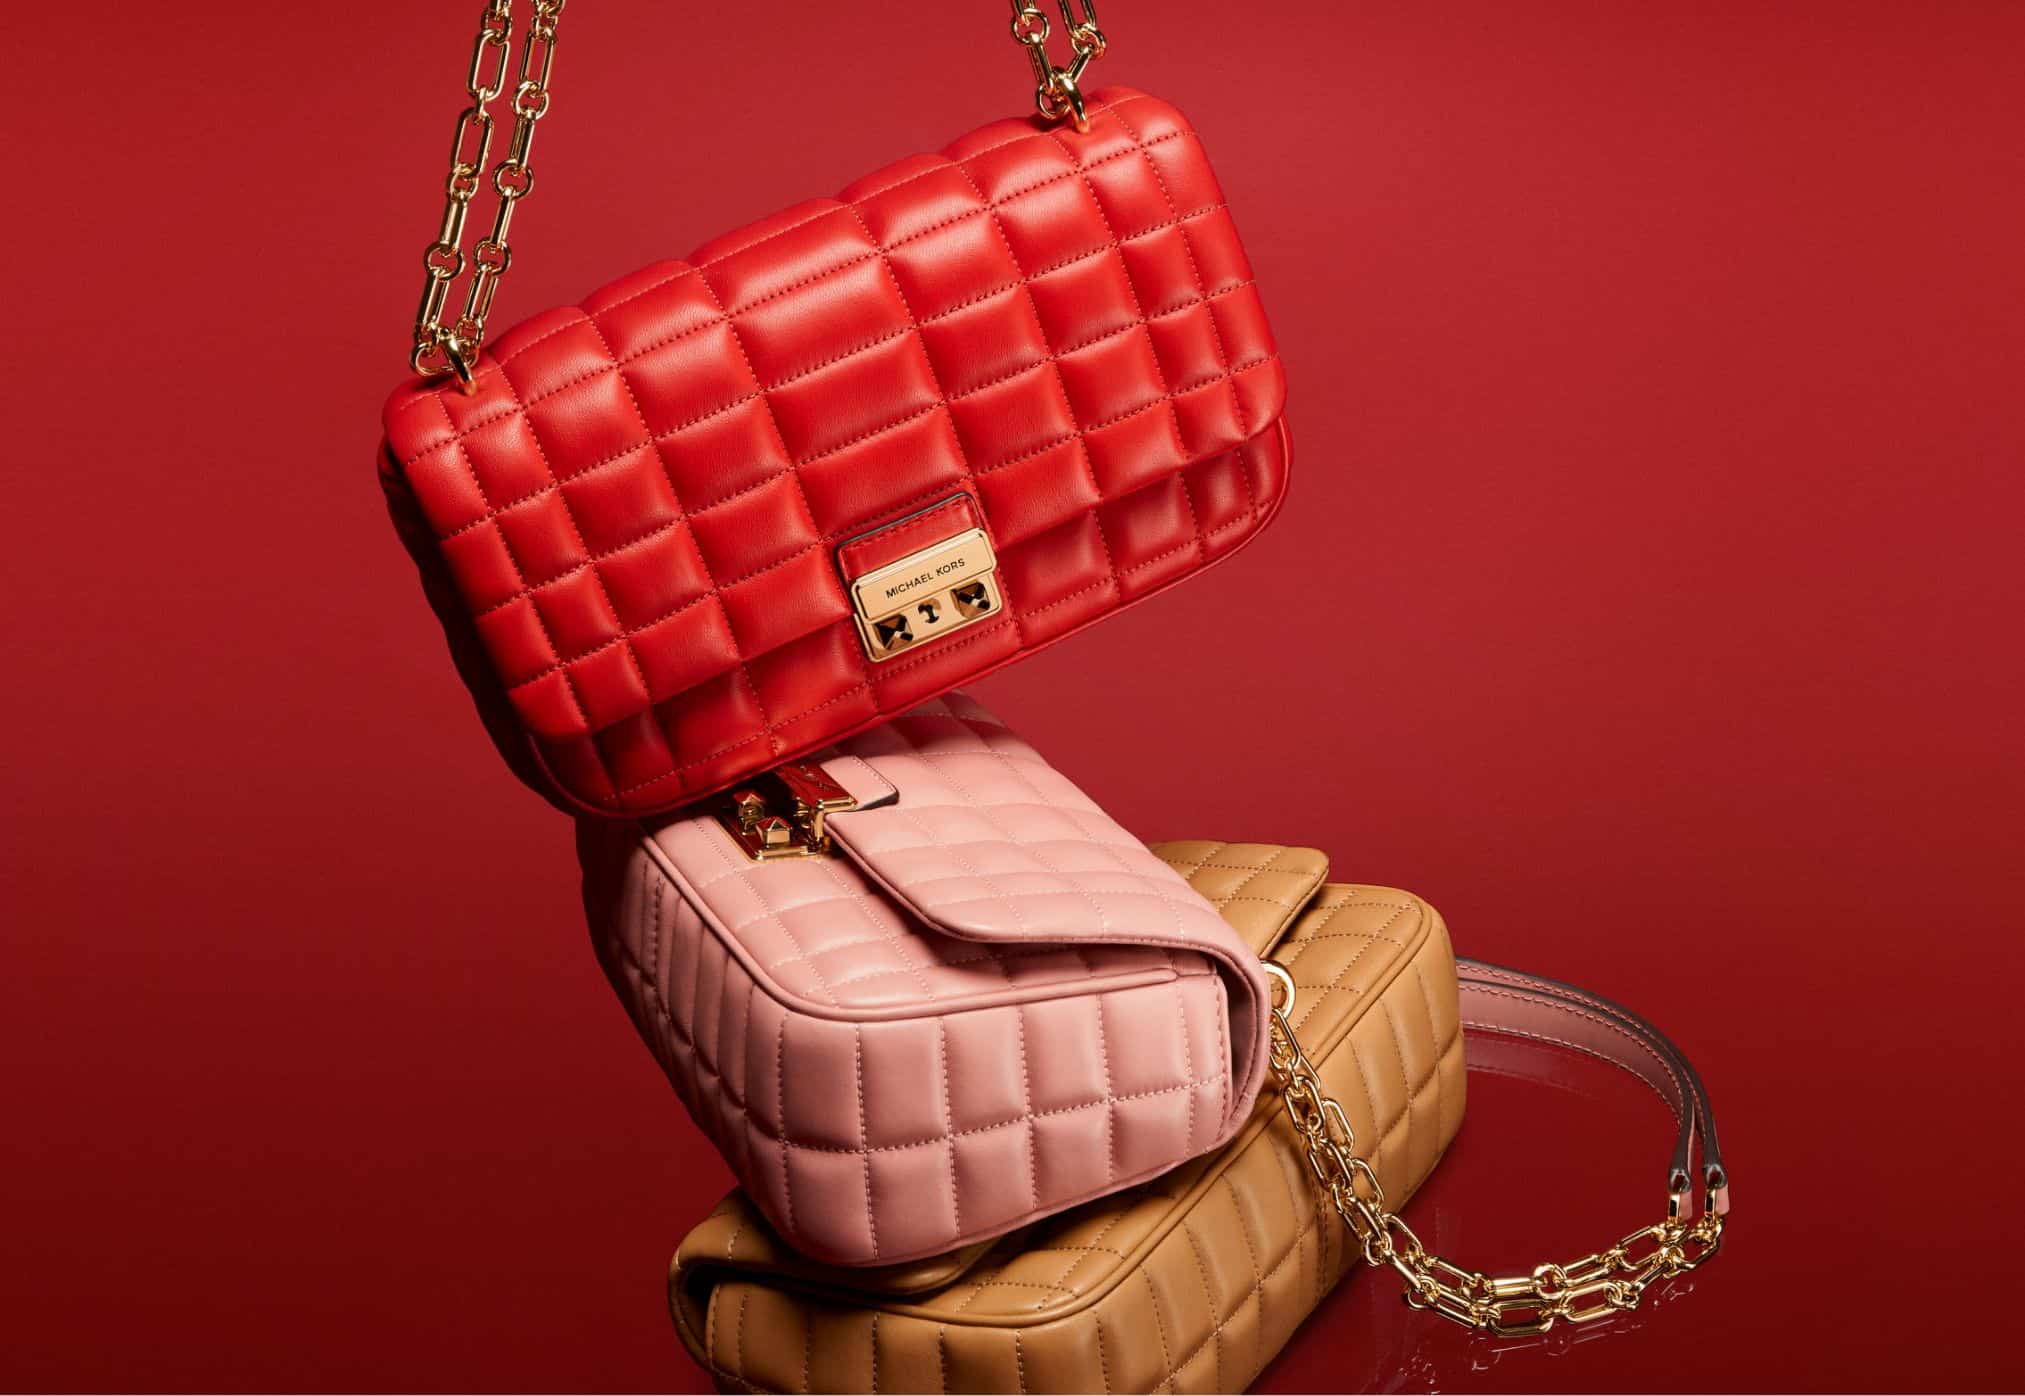 Luxury Designer Quilted Flap Bags With Gold Chain Multiple Colors Available  Shoulder, Crossbody, Tote, And Purse Baggit Handbags From Go_bags, $46.26